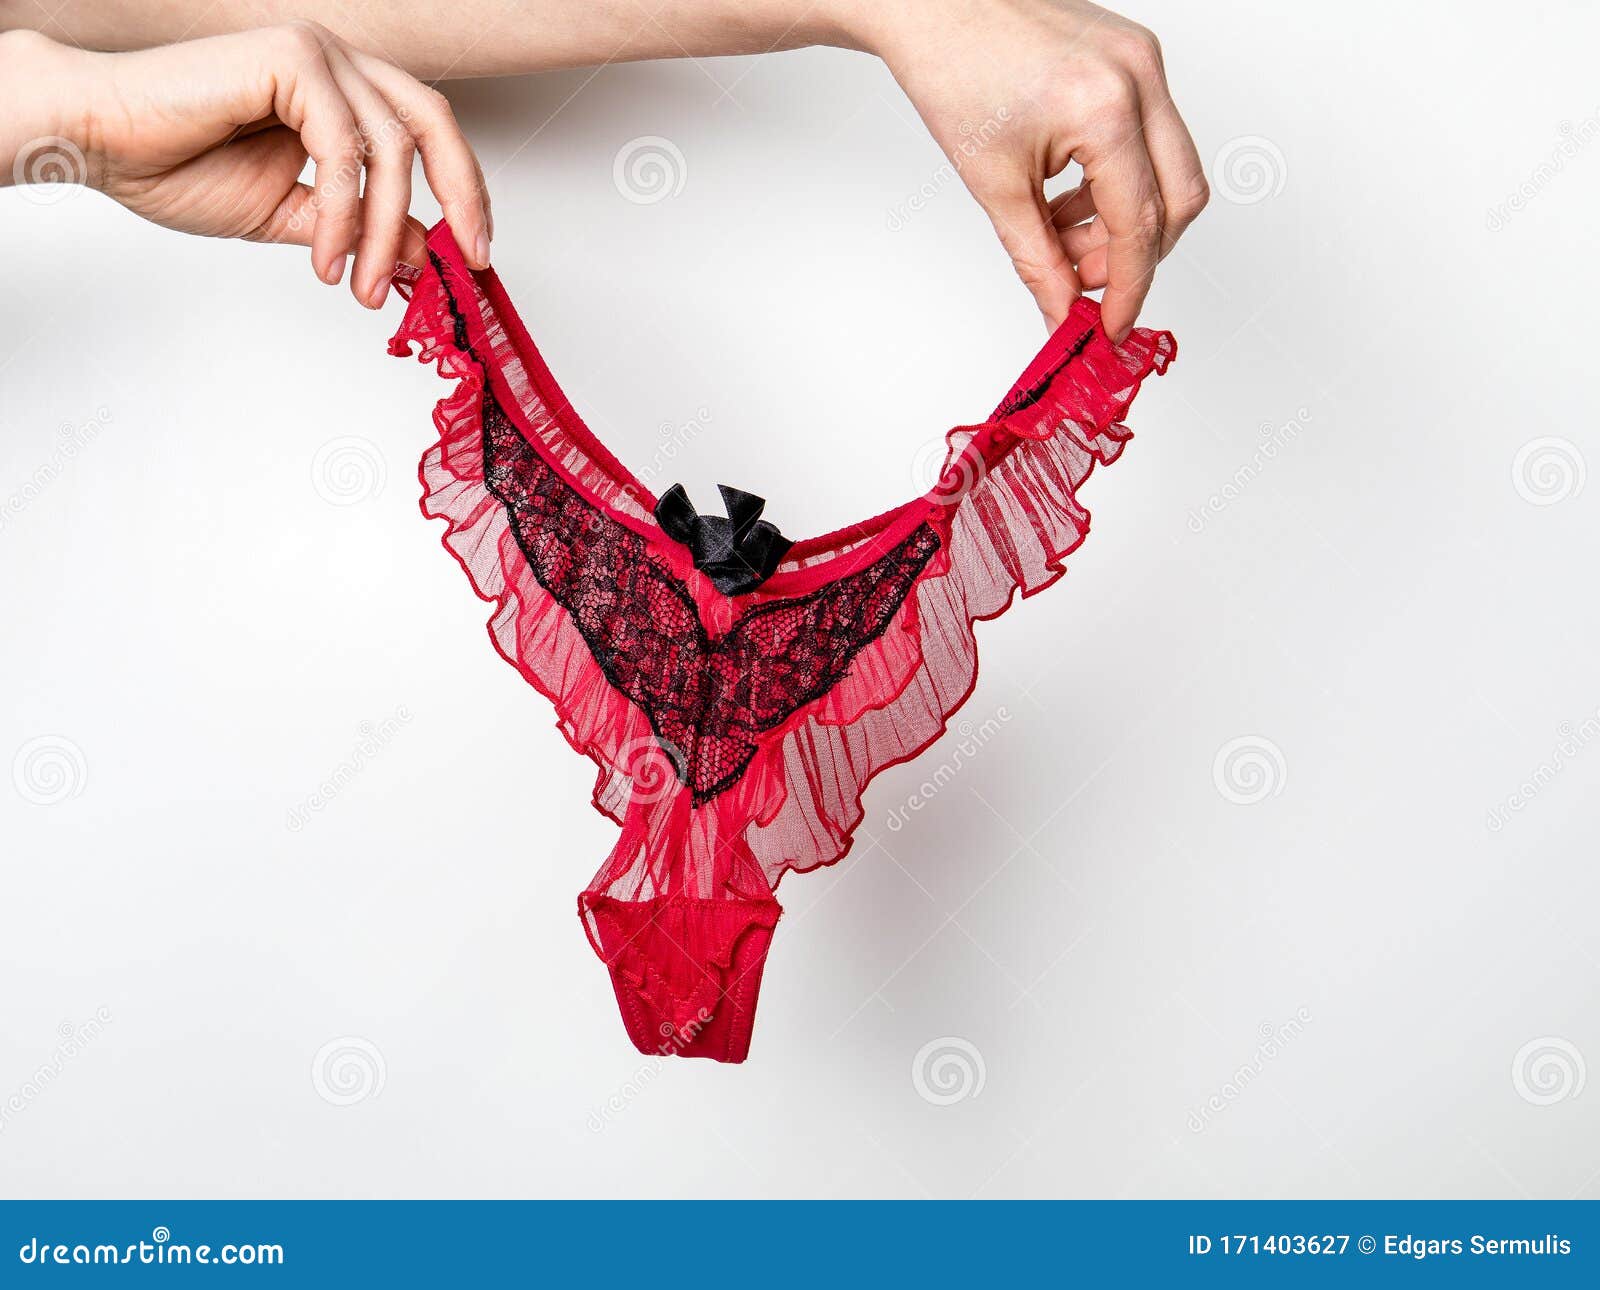 Woman Holding Red Panties on White Background Stock Image - Image